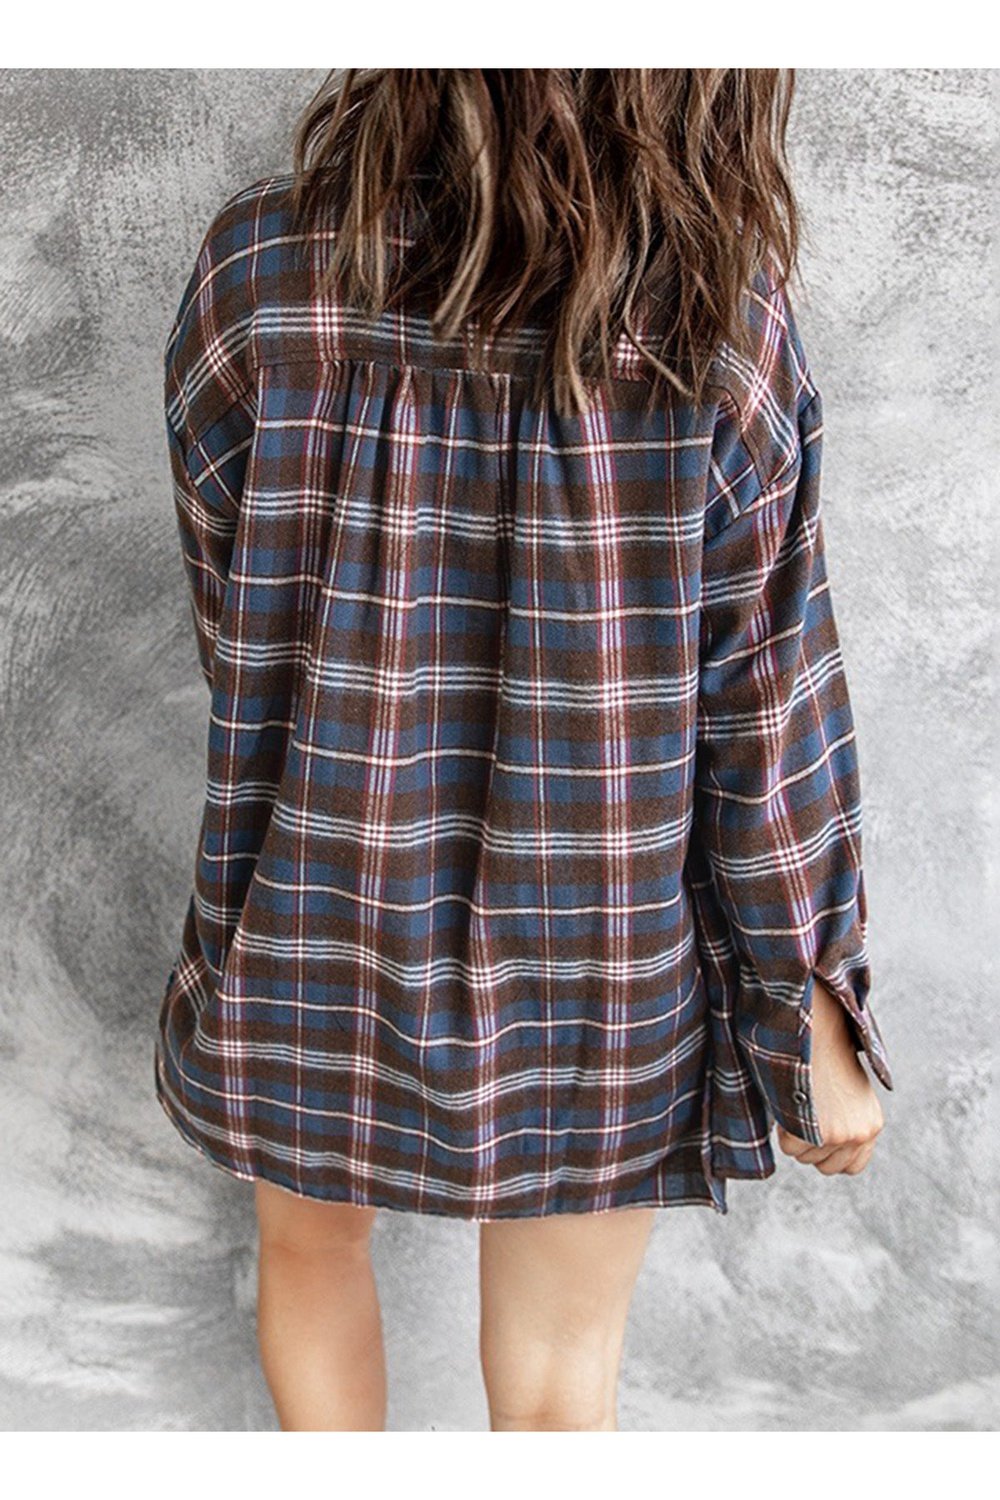 Plaid Slit High-Low Shirt with Pockets - Shirts - FITGGINS